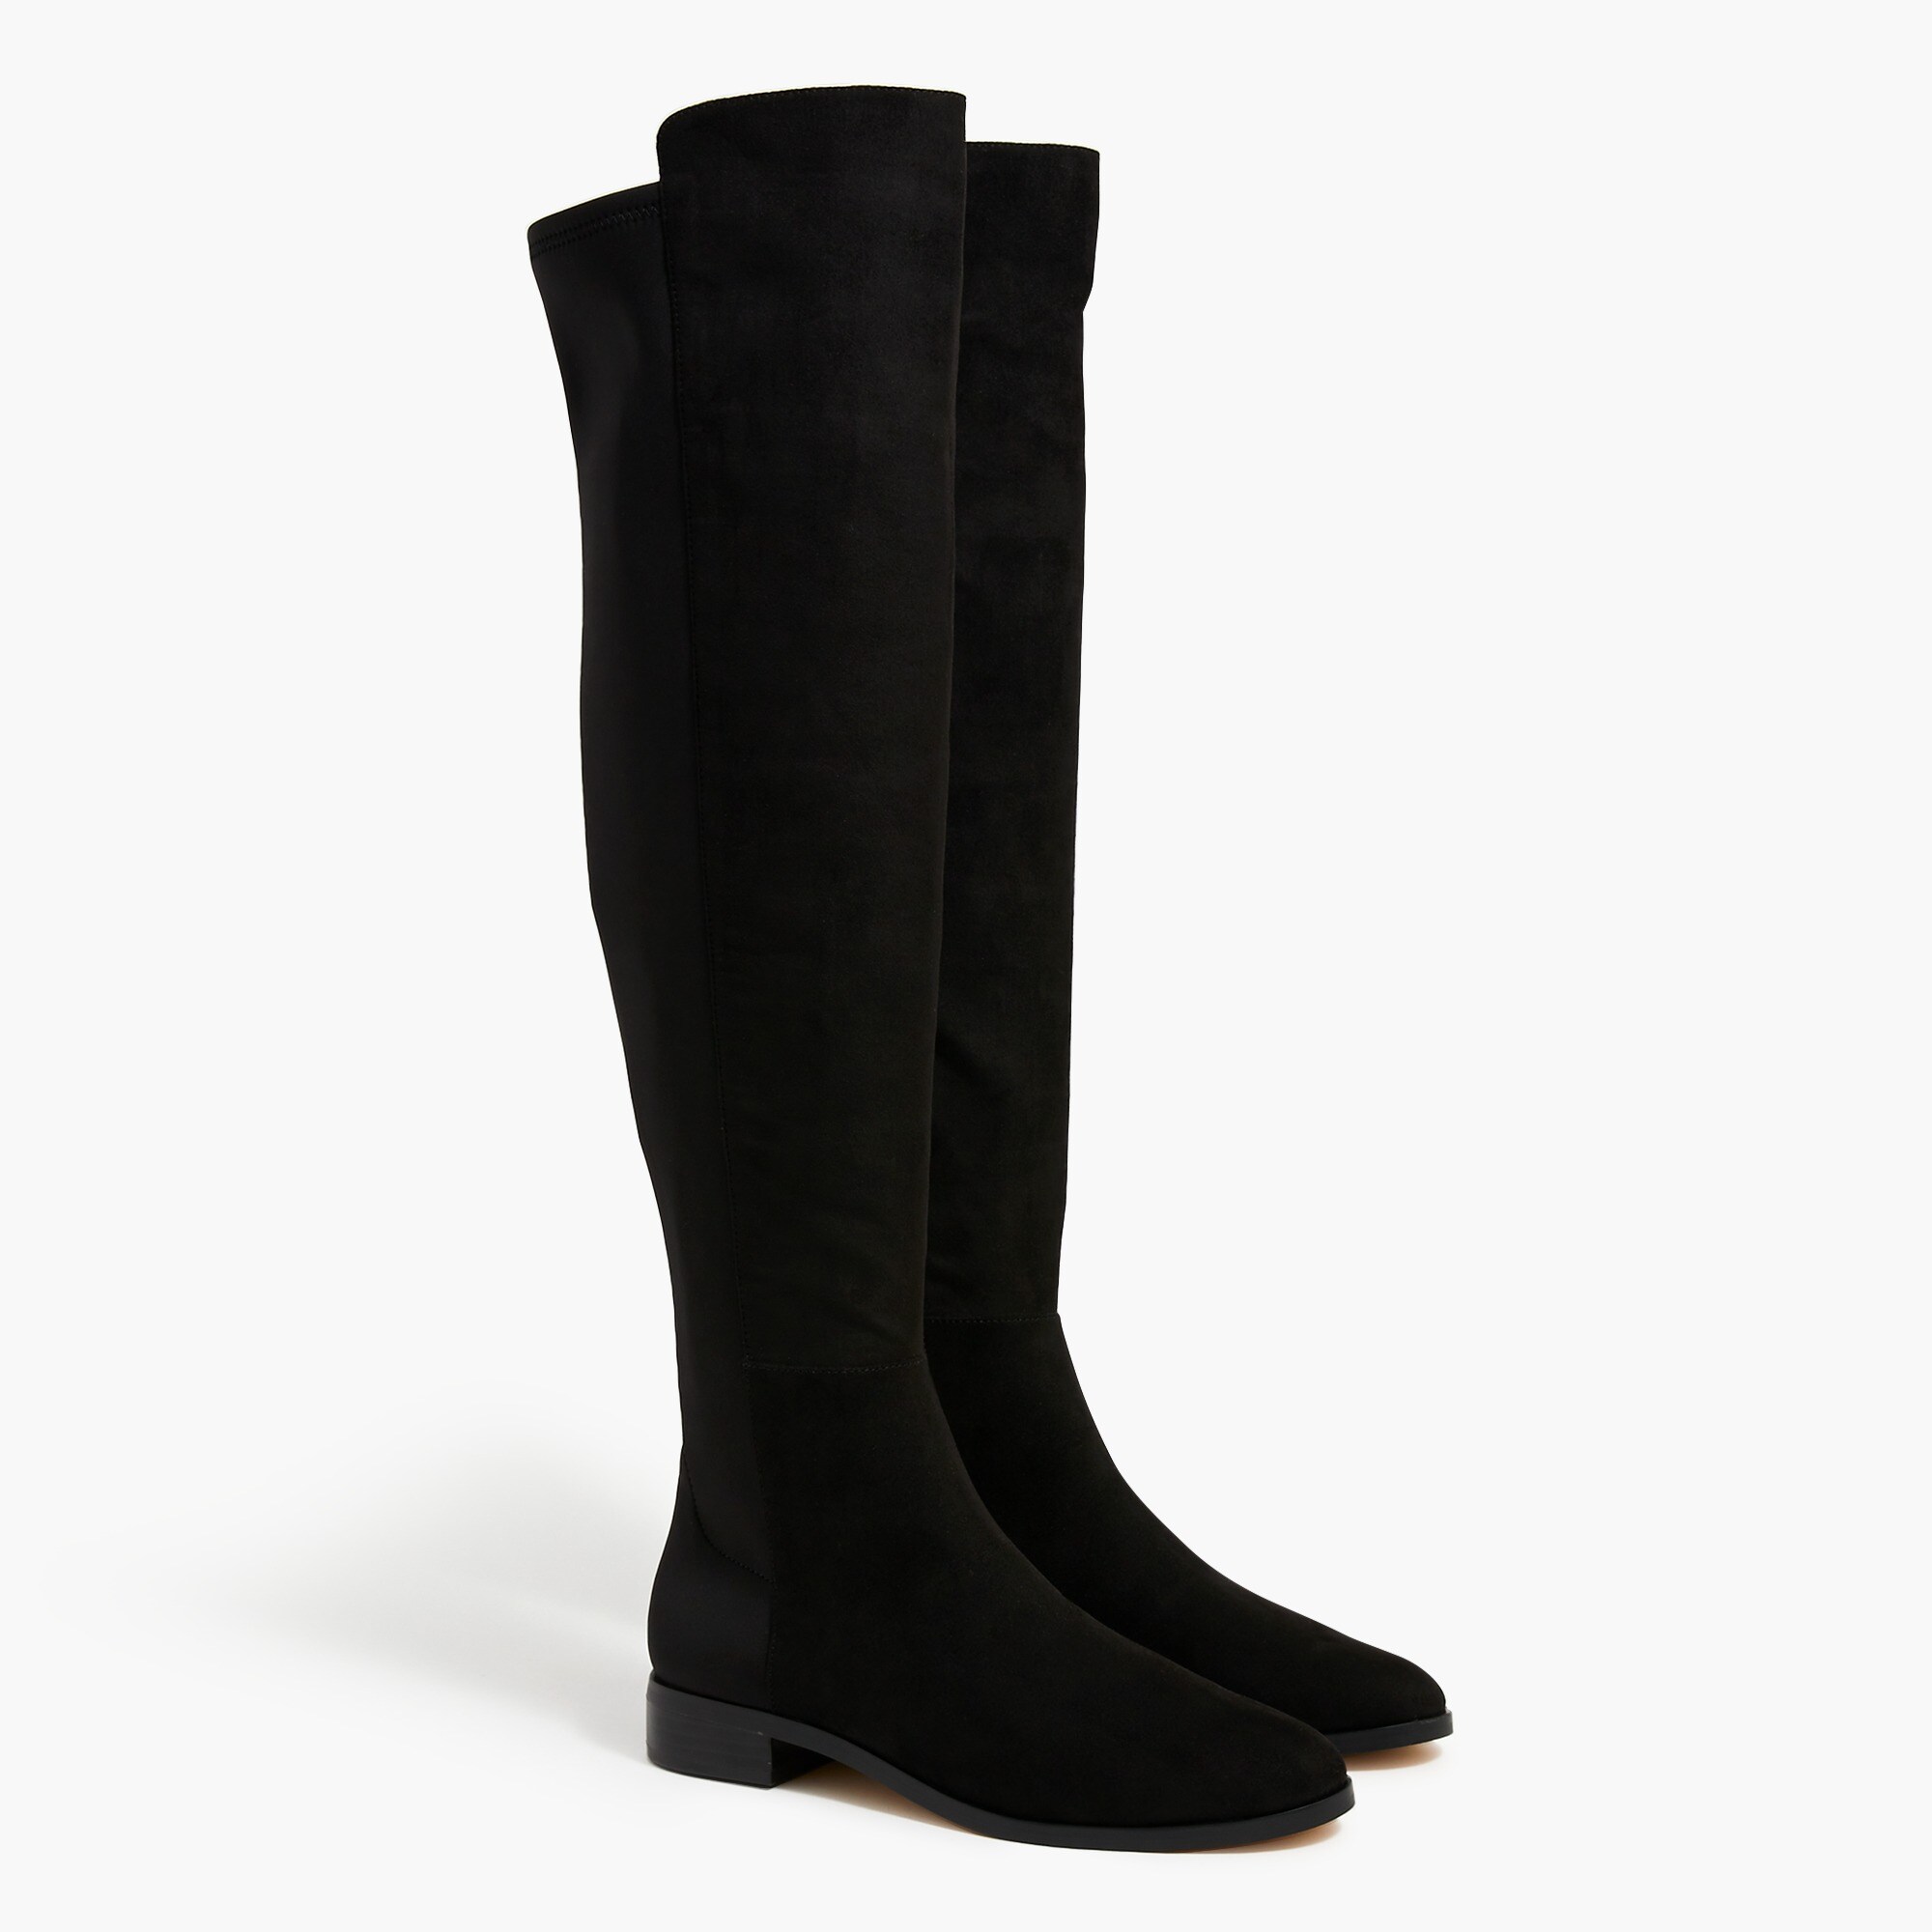  Sueded knee-high boots with stretch